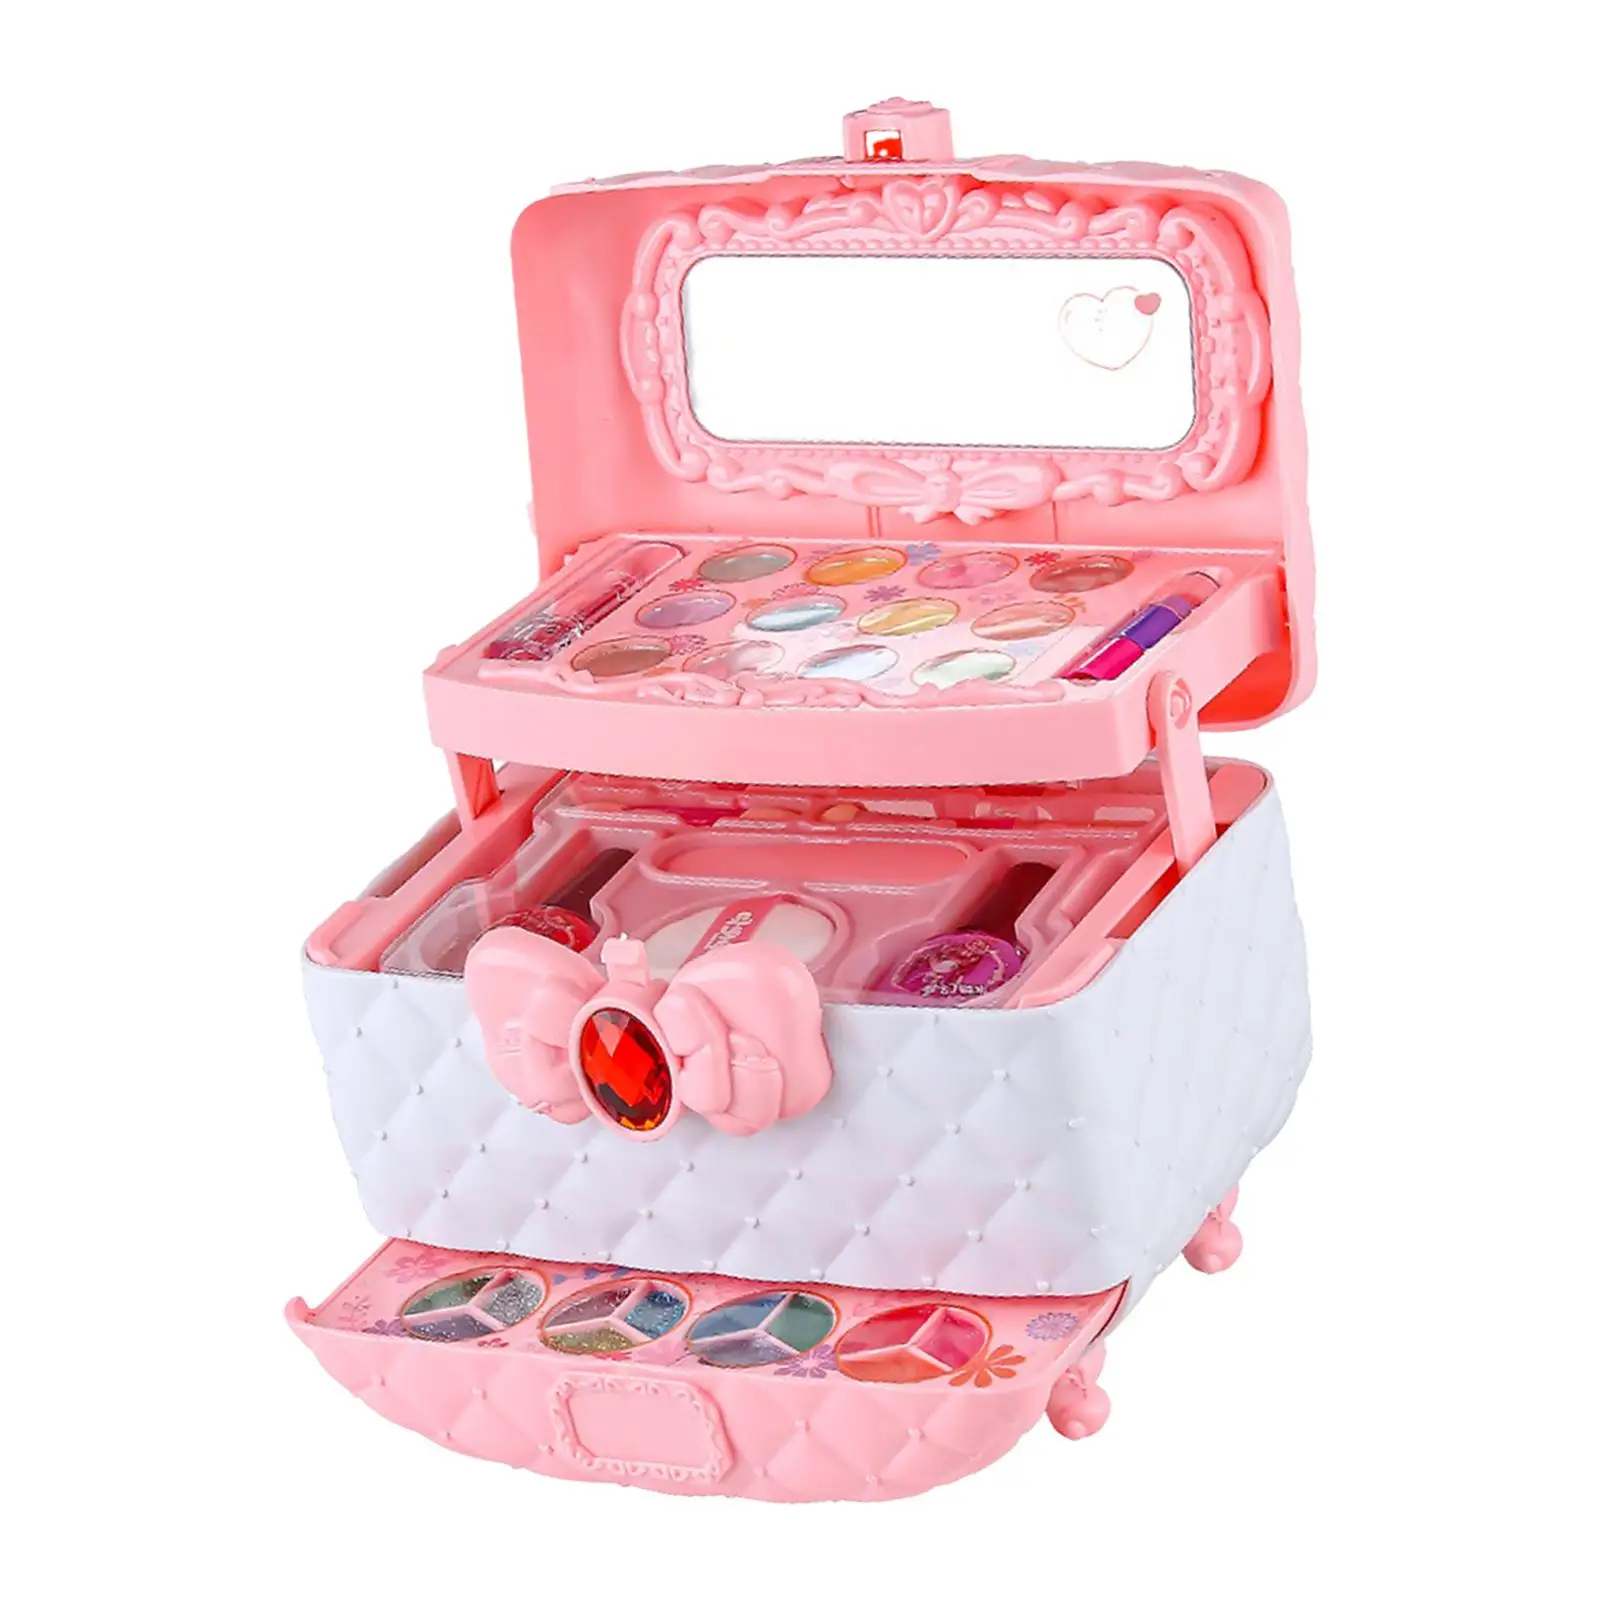 Kids Makeup Set with Cosmetic Case with Mirror Washable Makeup Set Toy Makeup Vanity Toy for Toddlers Girls Children Kids Gifts